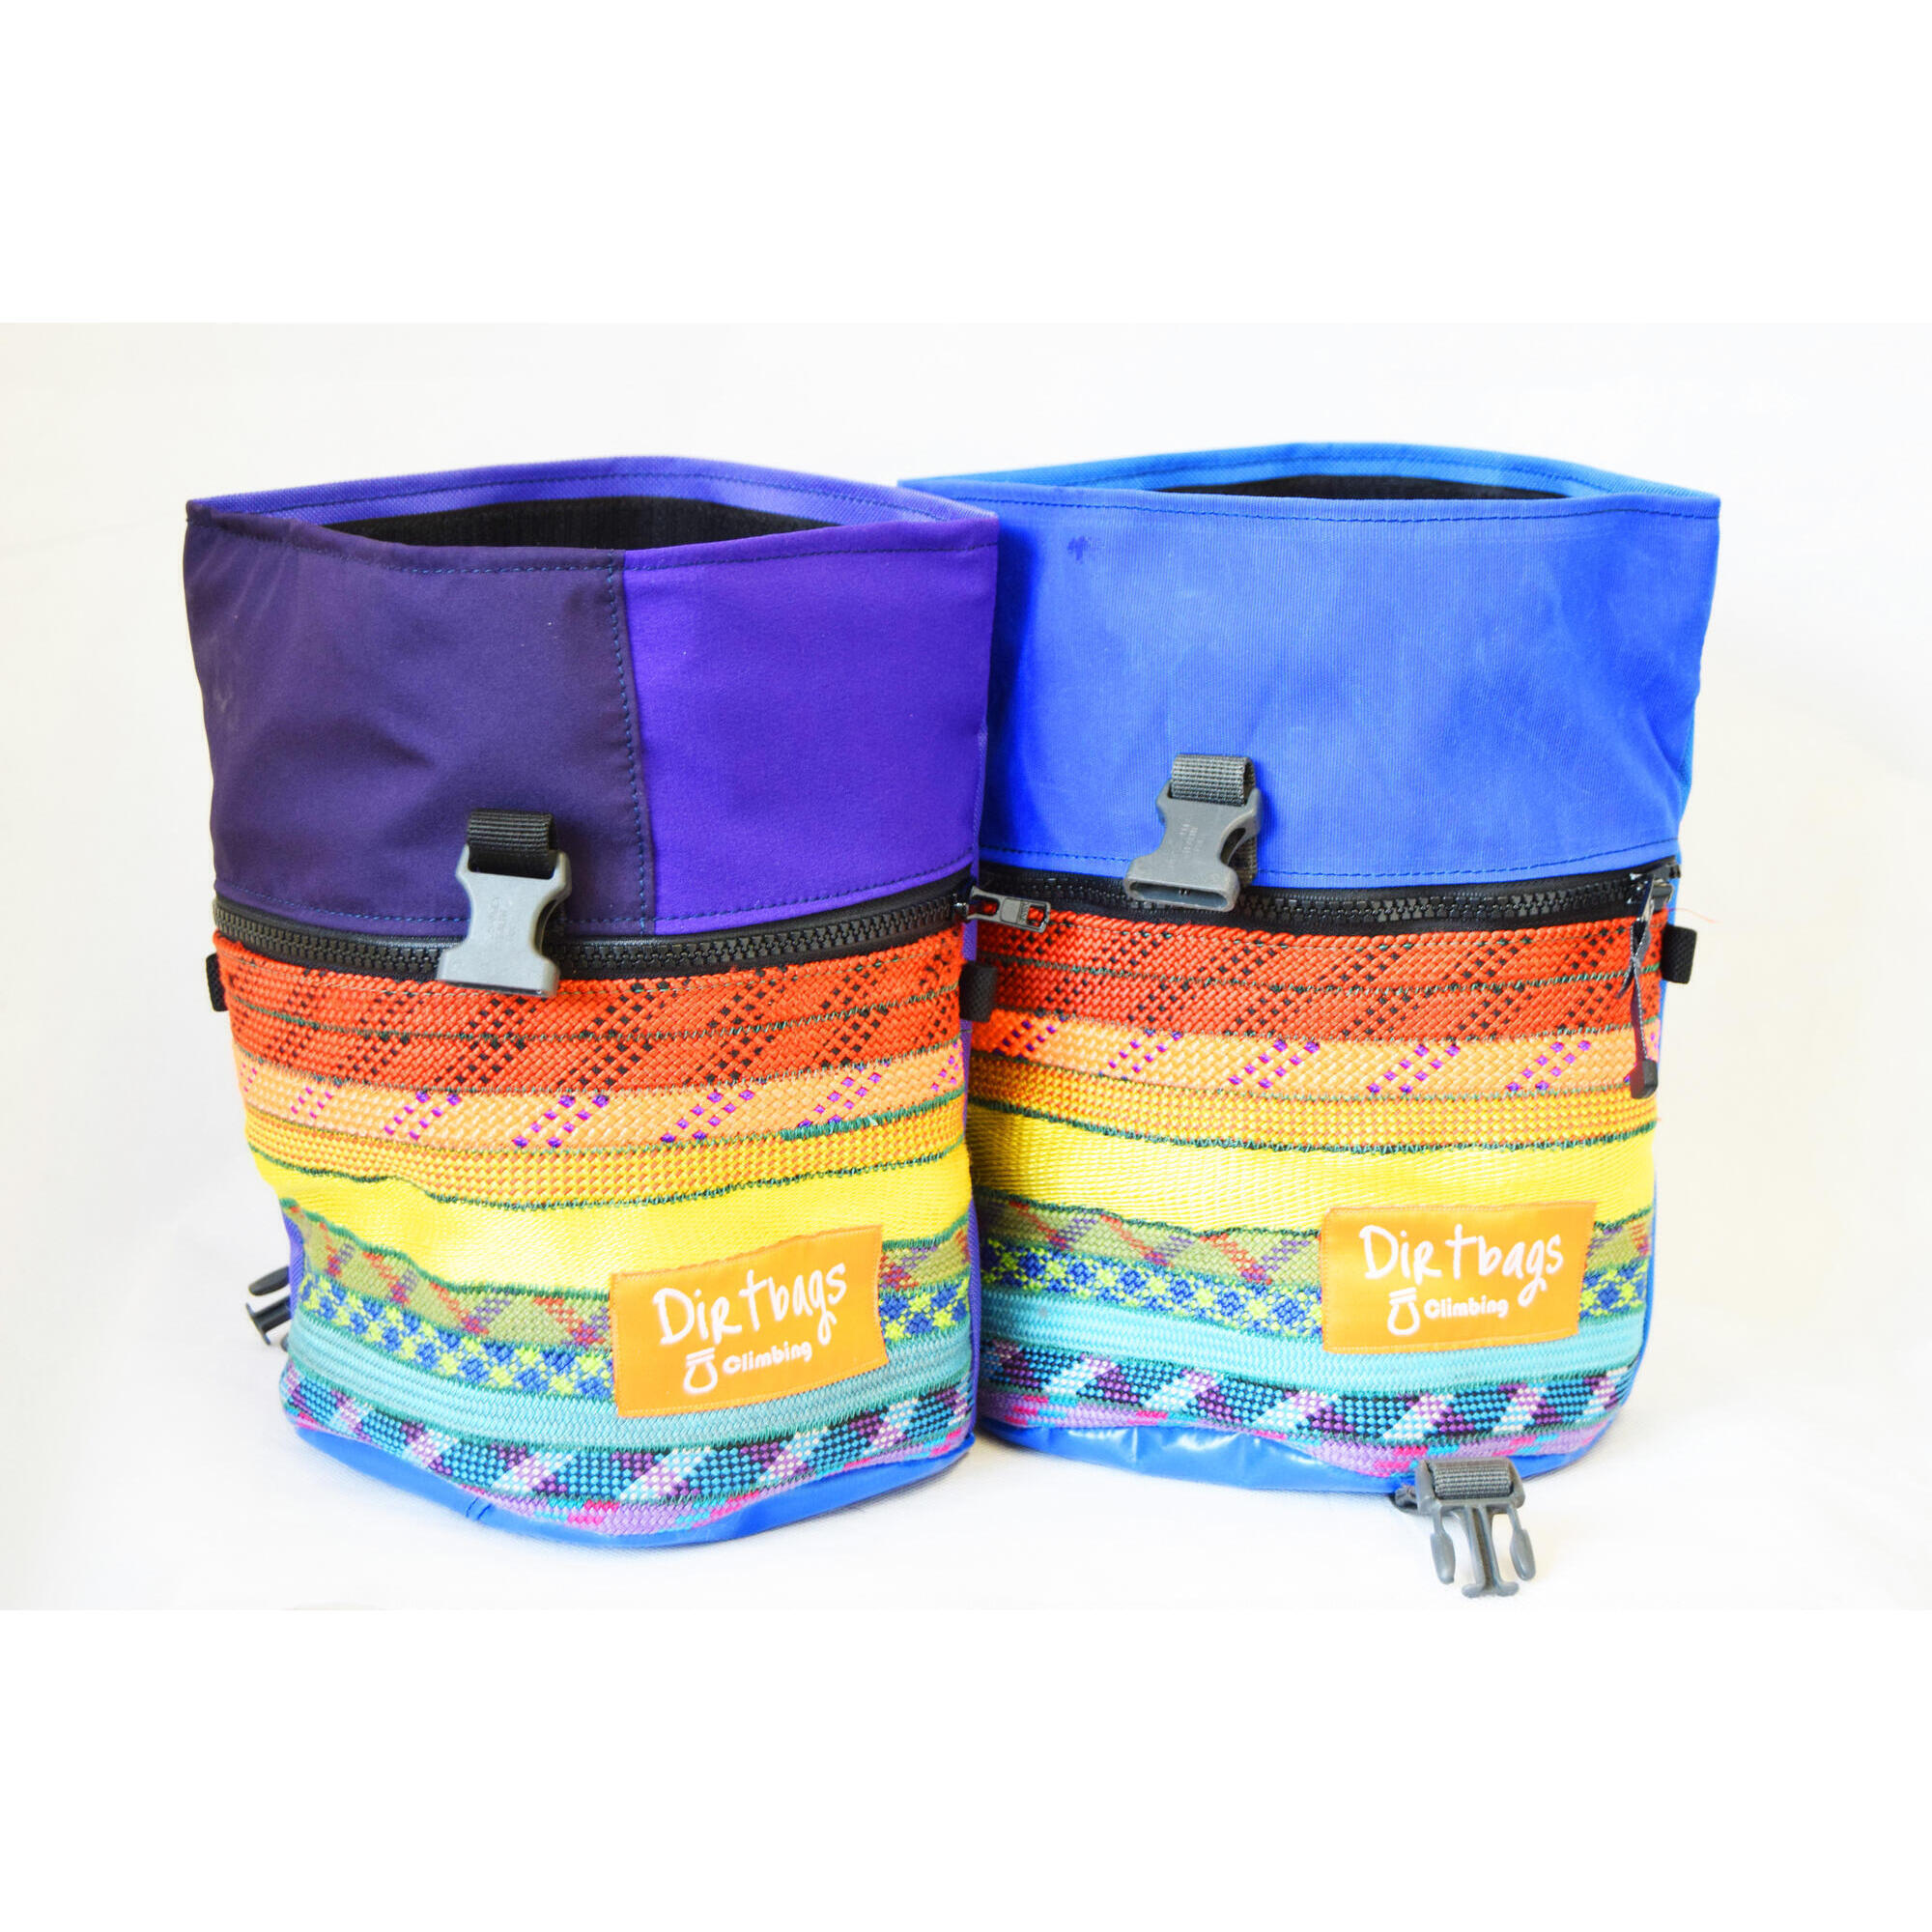 Boulder bag made with recycled climbing rope and upcycled fabric. Rainbow 1/4